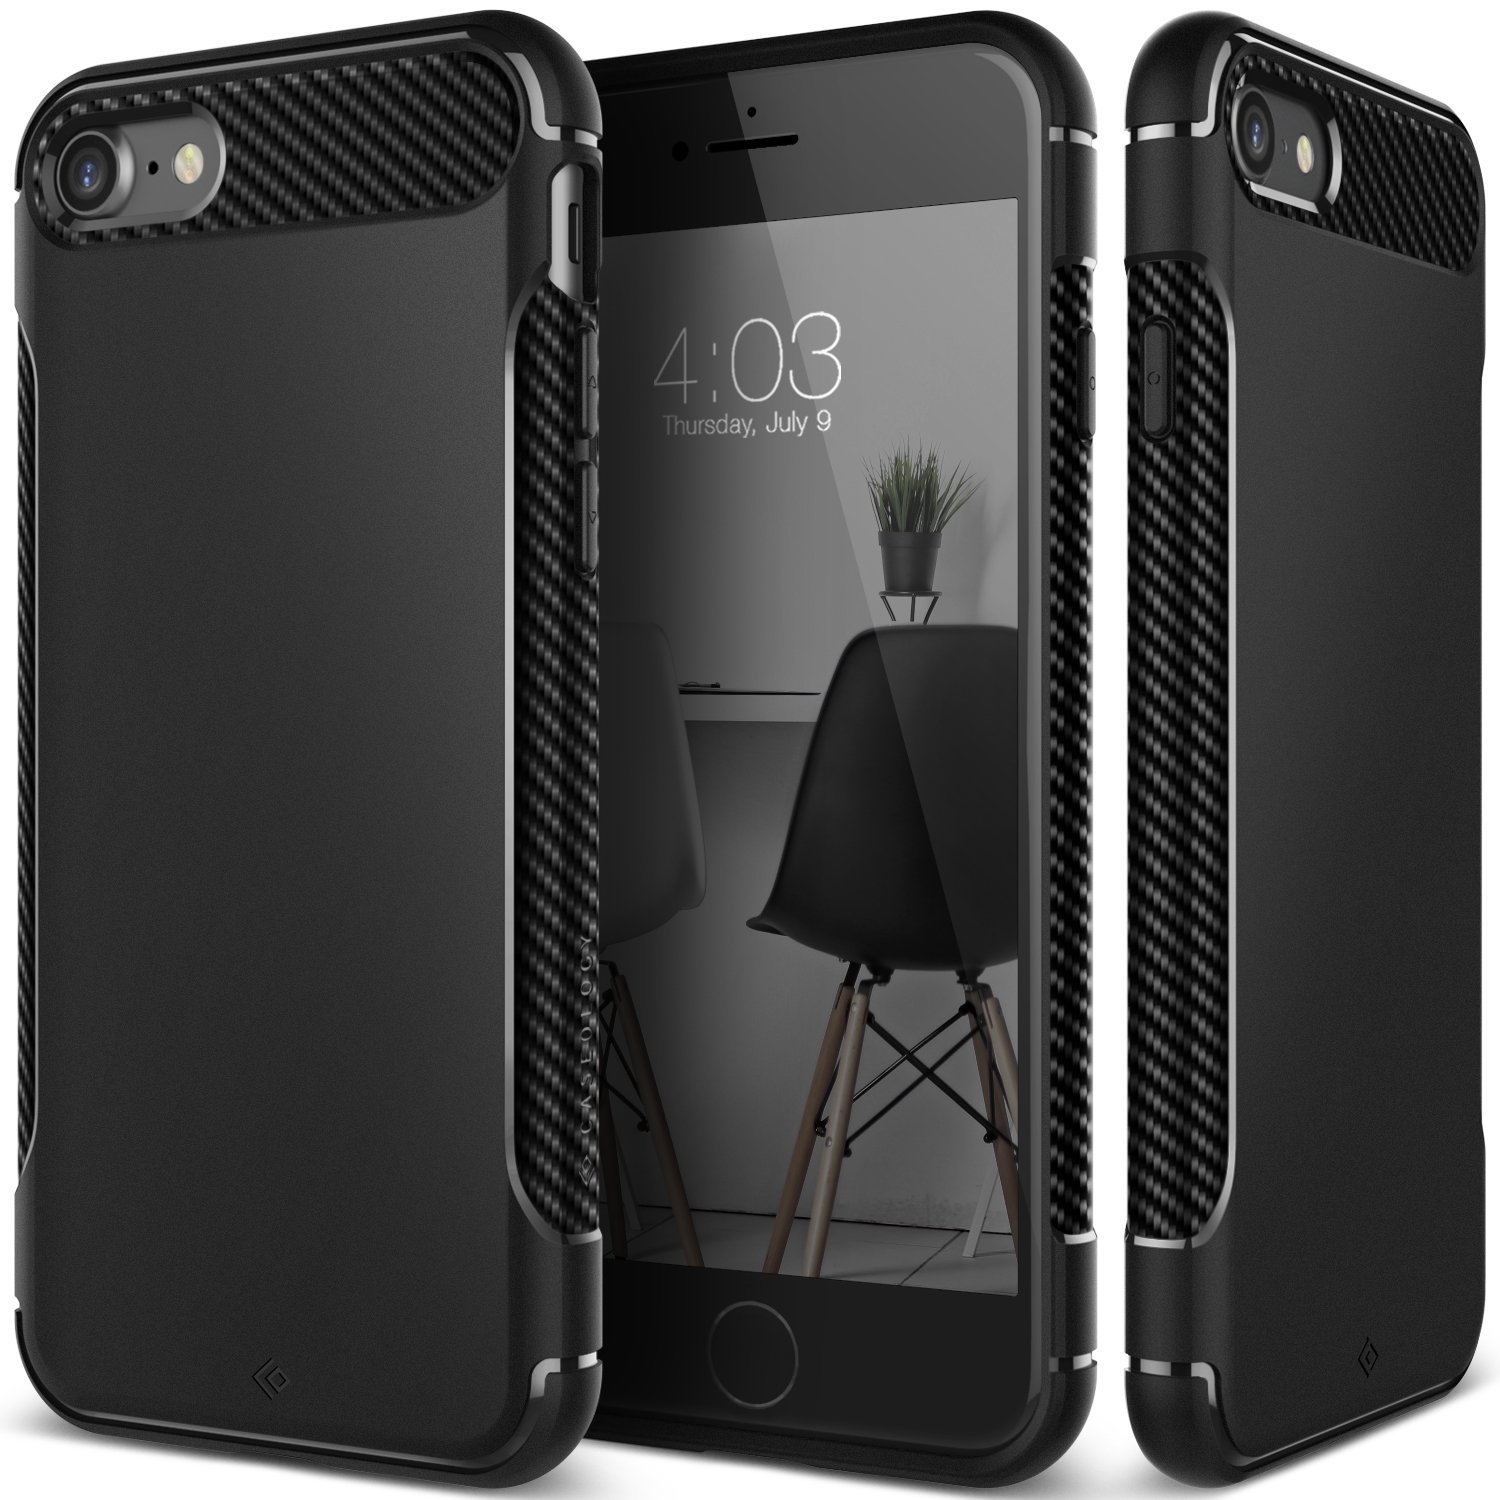 Best Cases For iPhone 7 - 6